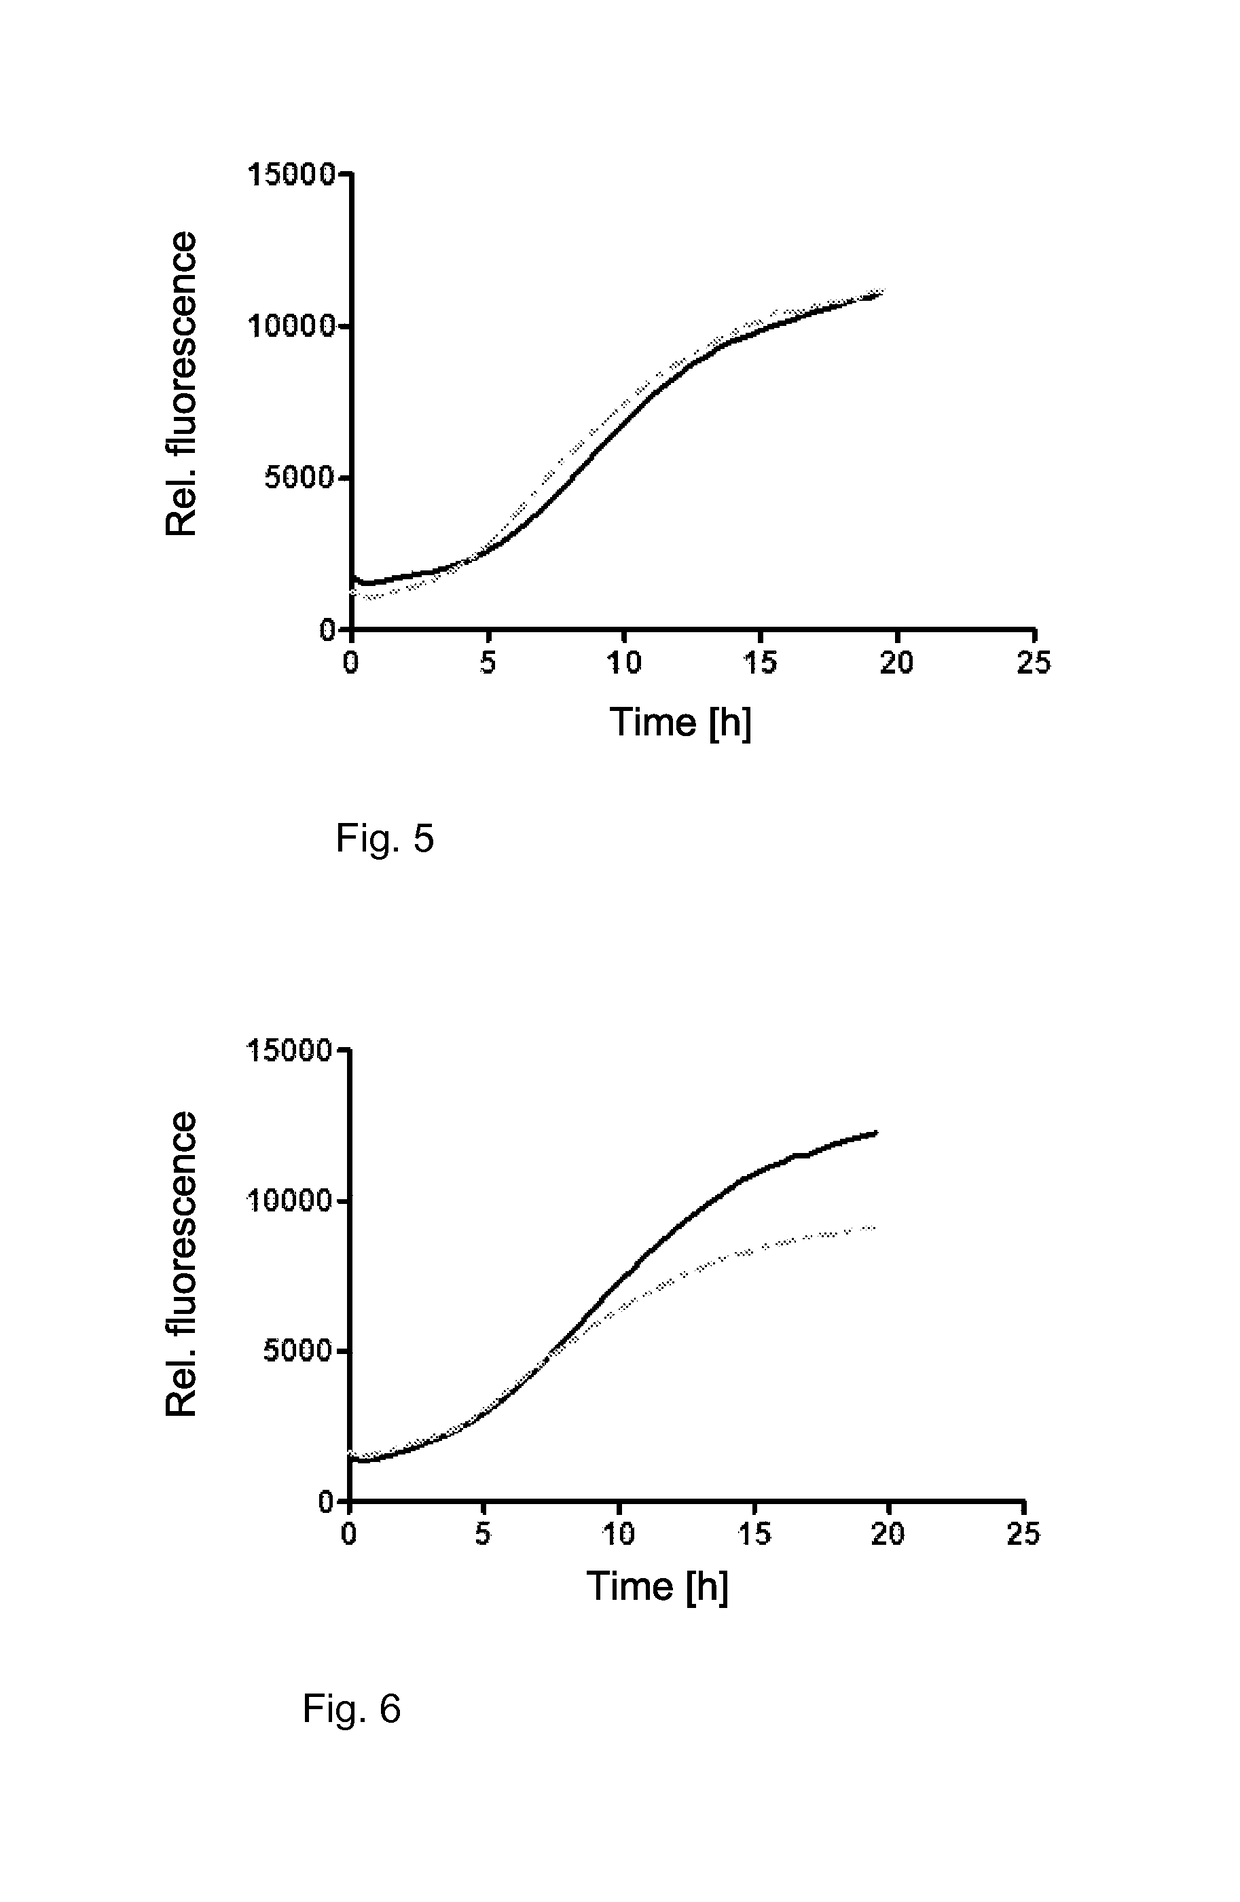 Method for treating blood, blood products and organs